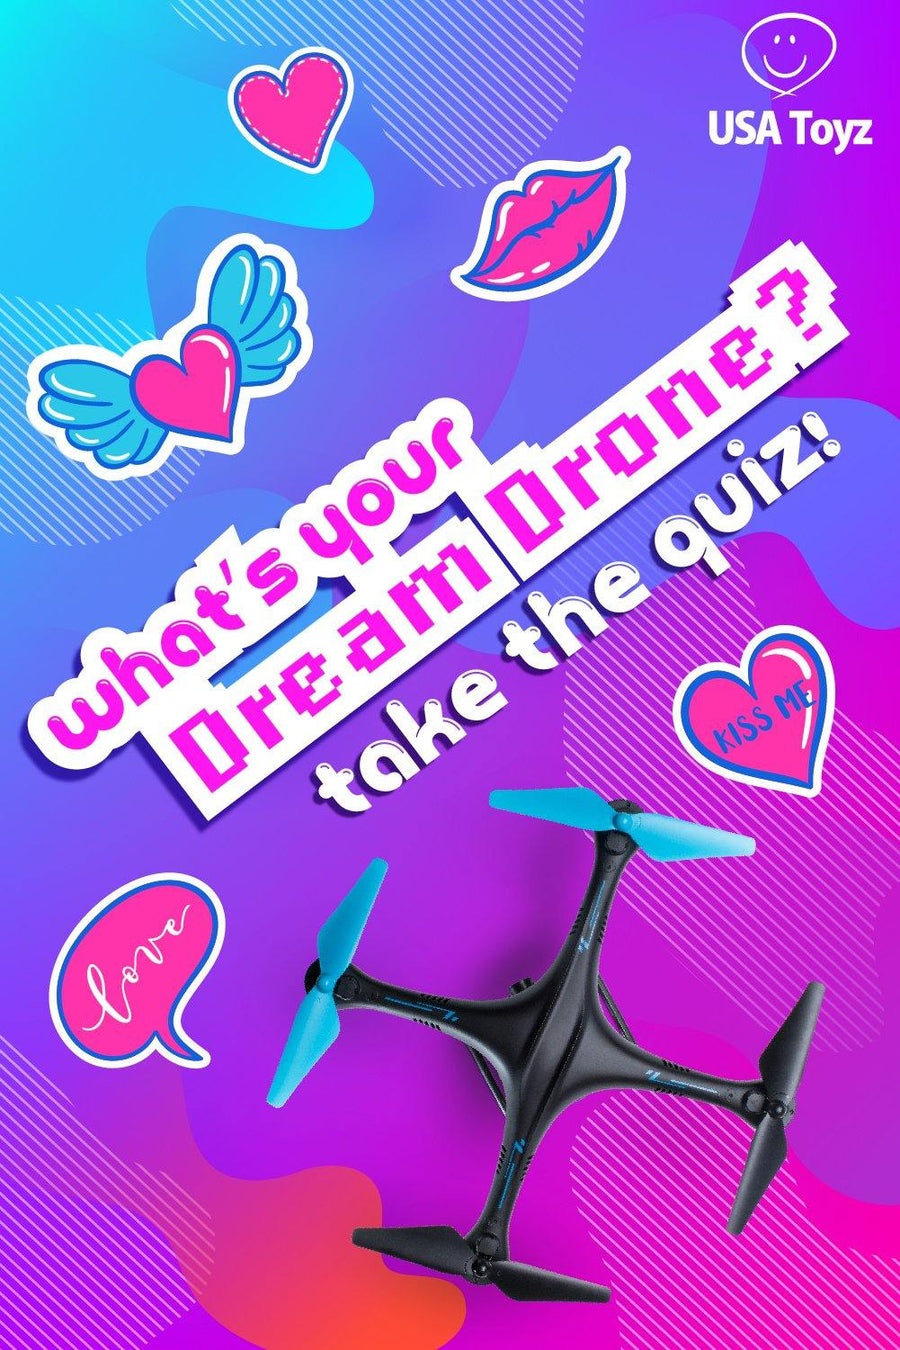 What's Your Dream Drone? - USA Toyz